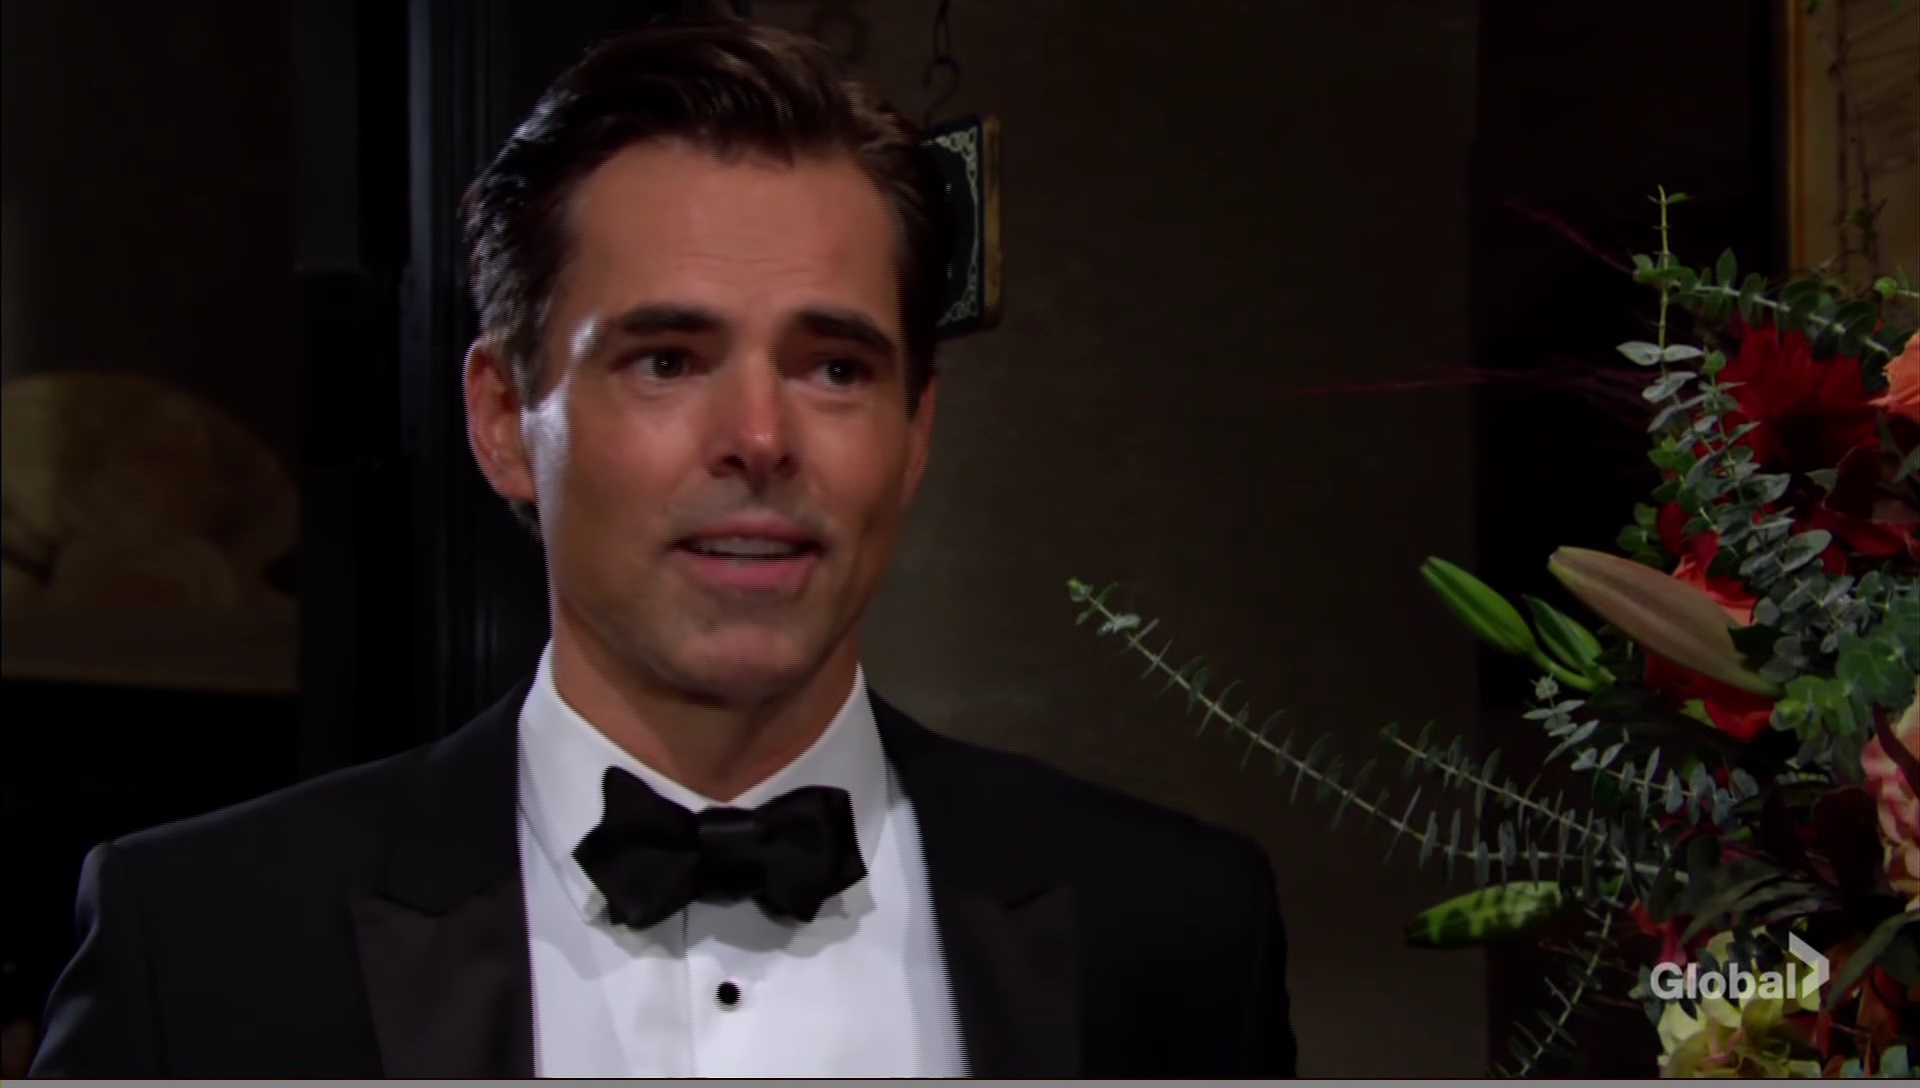 billy helps phyllis thanksgiving young restless